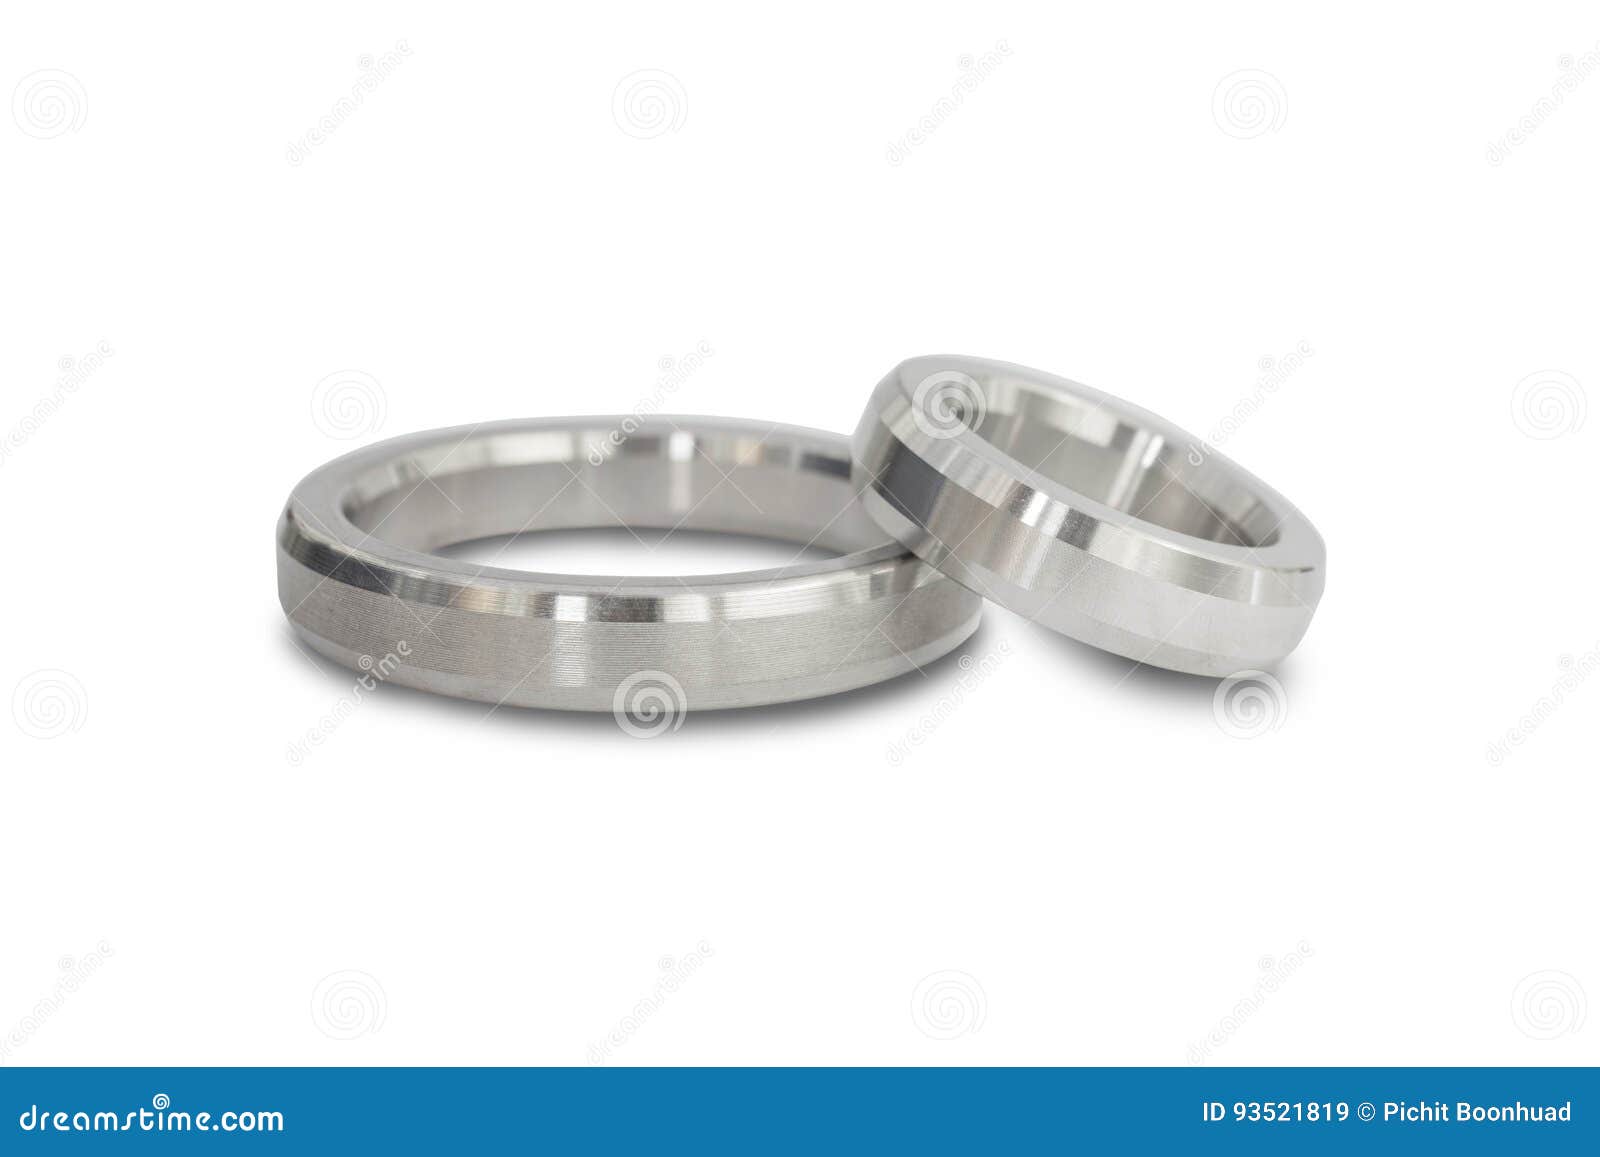 stainless steel ring type joint gasket isolate on white background with clipping path.